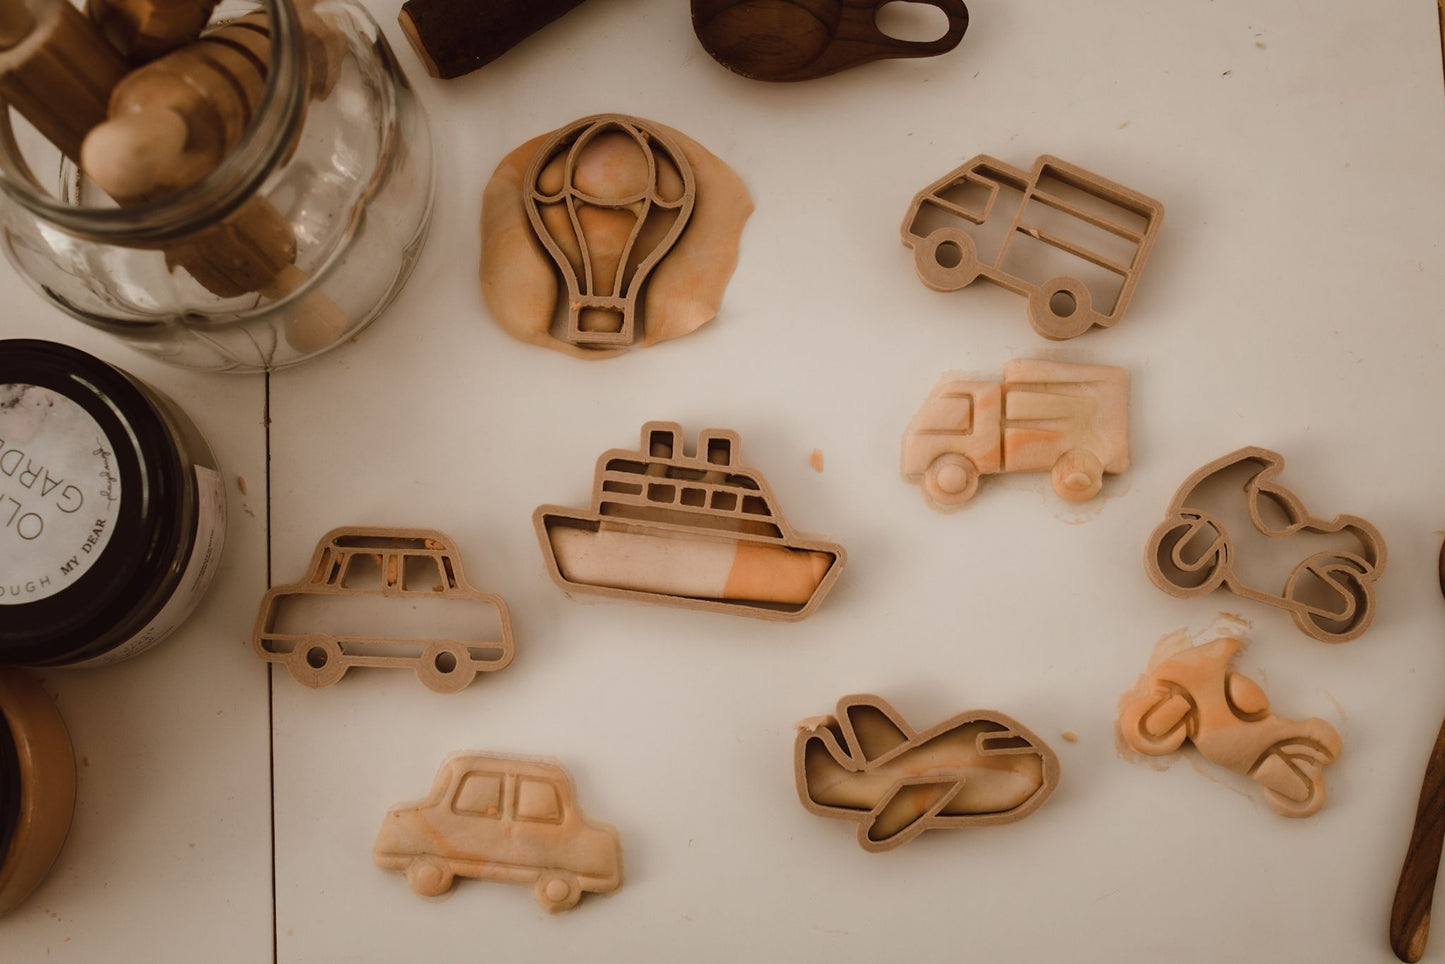 Kinfolk Pantry eco playdough cutters - a set of 6 transport themed biodegradable cutters for kids arts and crafts. Image shows each cutter being used to make the shapes in playdough.